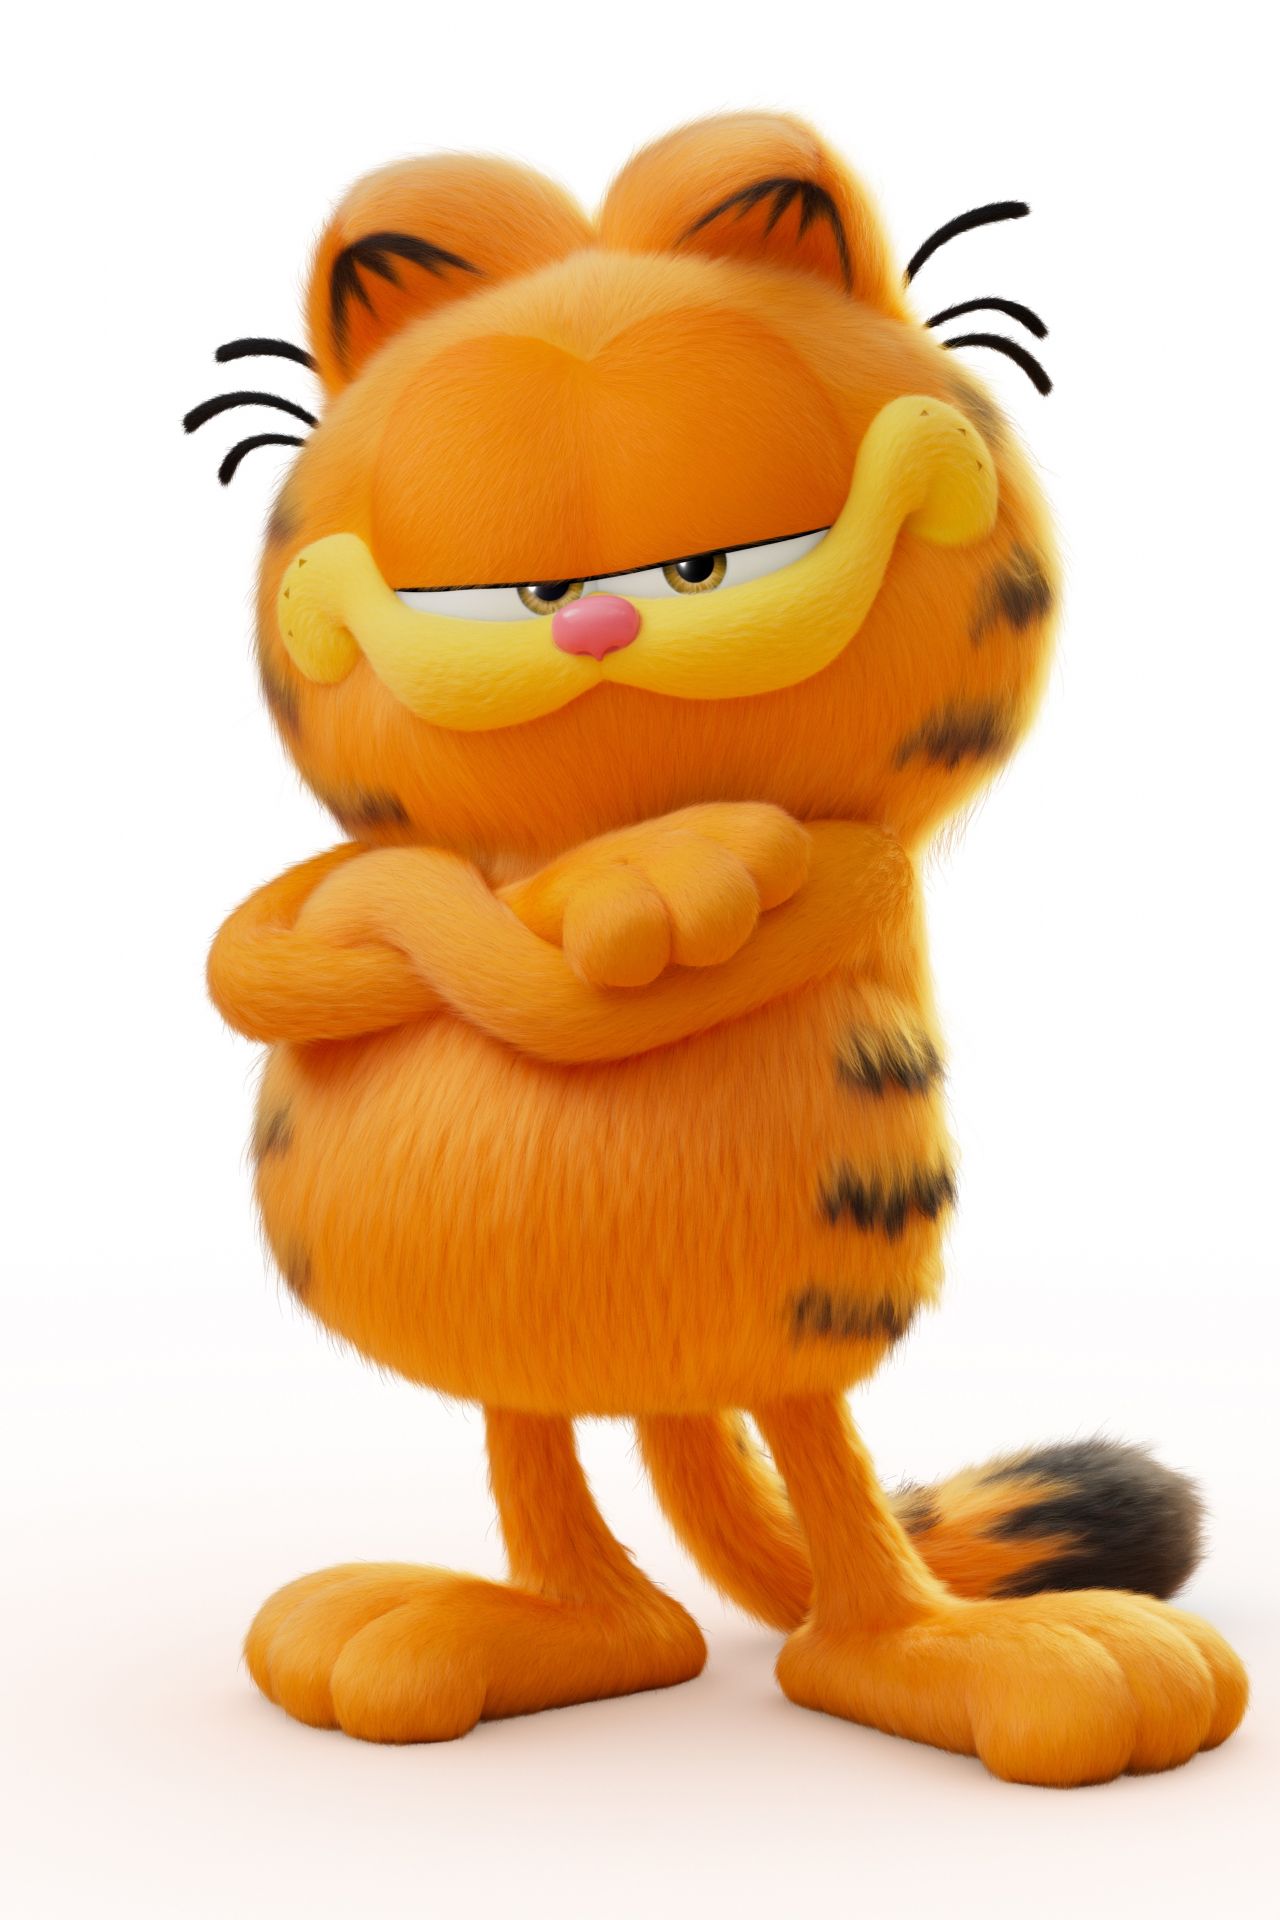 The Garfield Movie Ending Explained